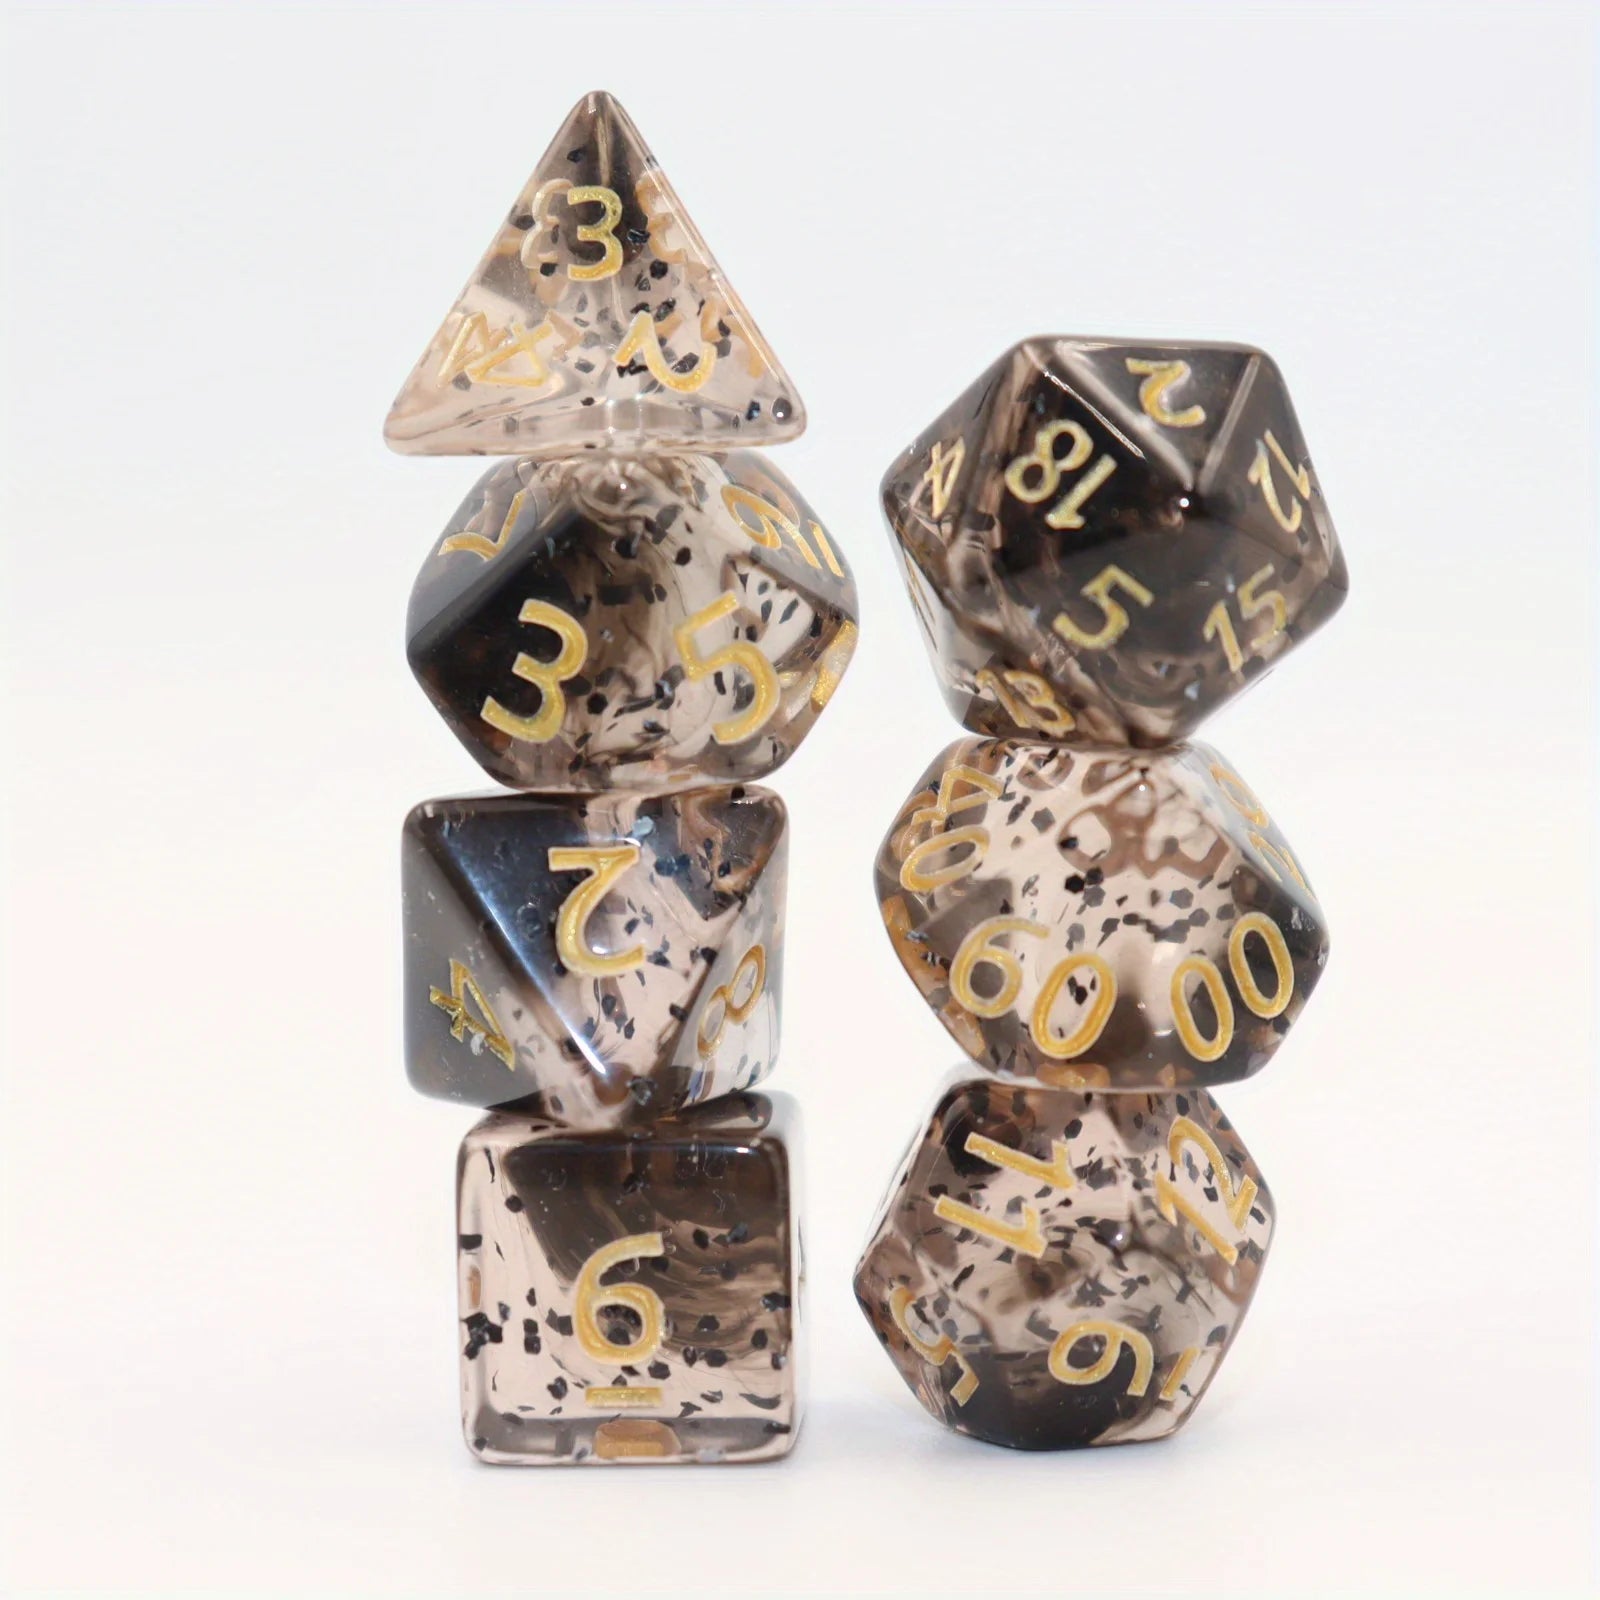 7pcs Set Crystal Style DND Dice Set, Polyhedral Table Game Dice Role-Playing RPG Dice With Box black